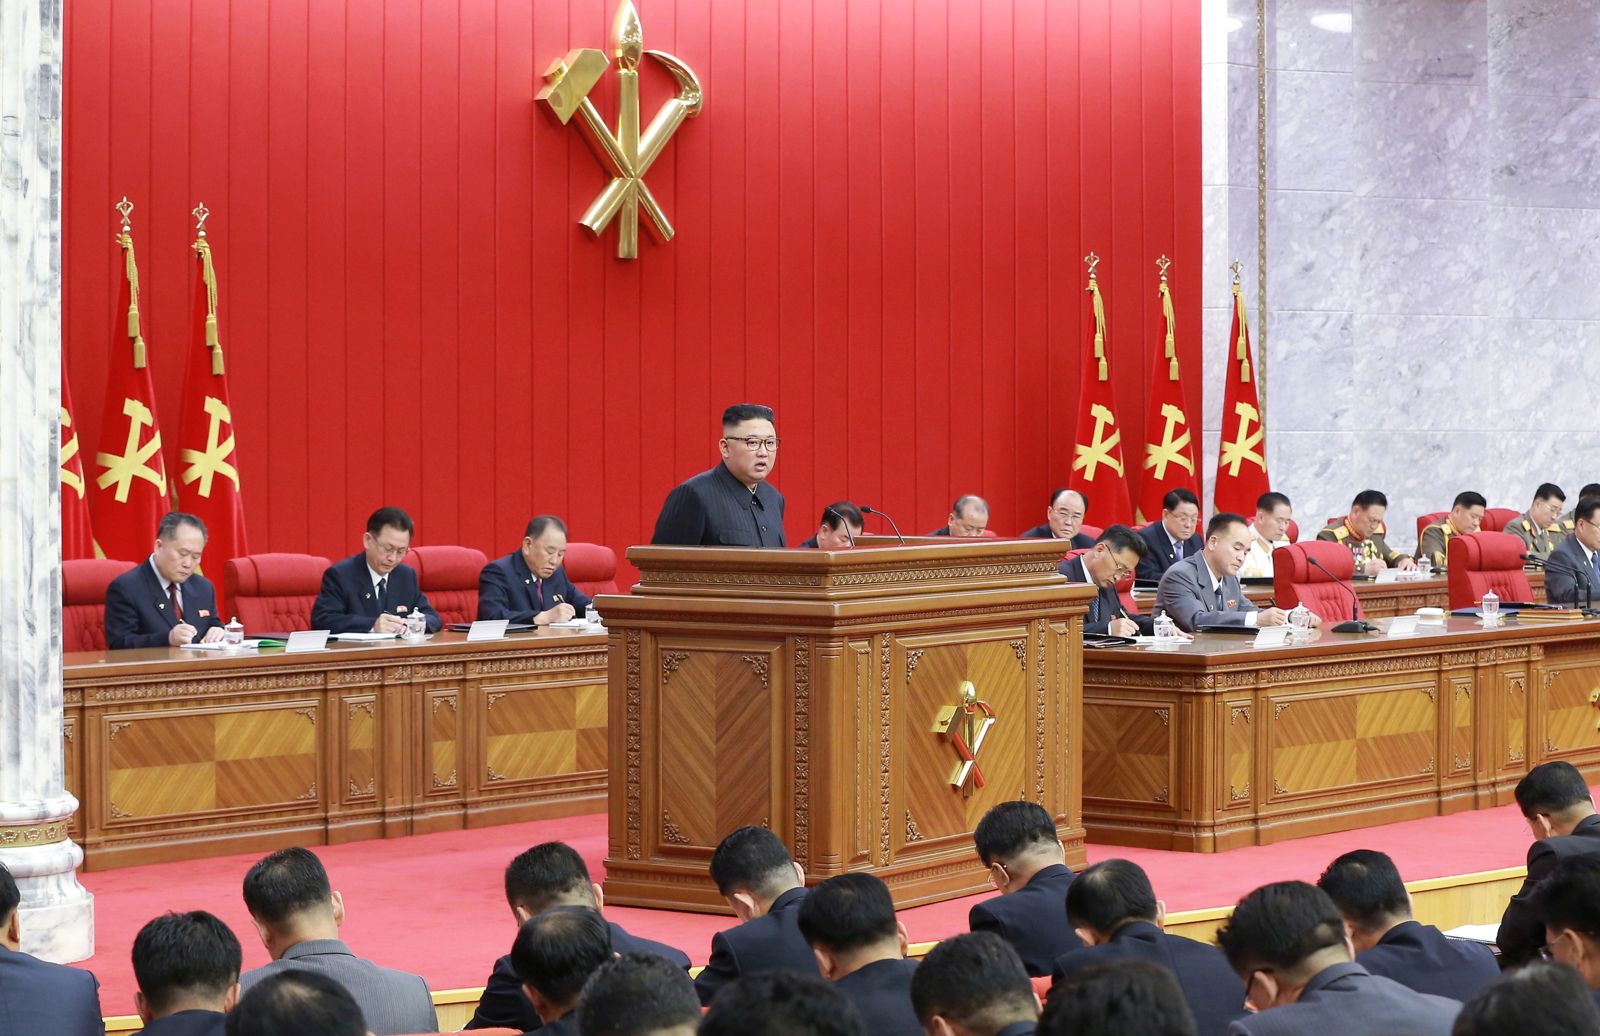 epa09275007 A photo released by the official North Korean Central News Agency (KCNA) shows North Korean Supreme Leader Kim Jong-un (C) presiding over the opening of the third Plenary Meeting of the 8th Central Committee of the Workers' Party of Korea (WPK), amid unusual concern and expectations of all the Party members and all the people of the country keeping high fighting spirit braving manifold difficulties in their advance along the path indicated by the historic 8th Congress of the Party, in Pyongyang, North Korea, 15 June 2021 (issued 16 June 2021).  EPA/KCNA   EDITORIAL USE ONLY